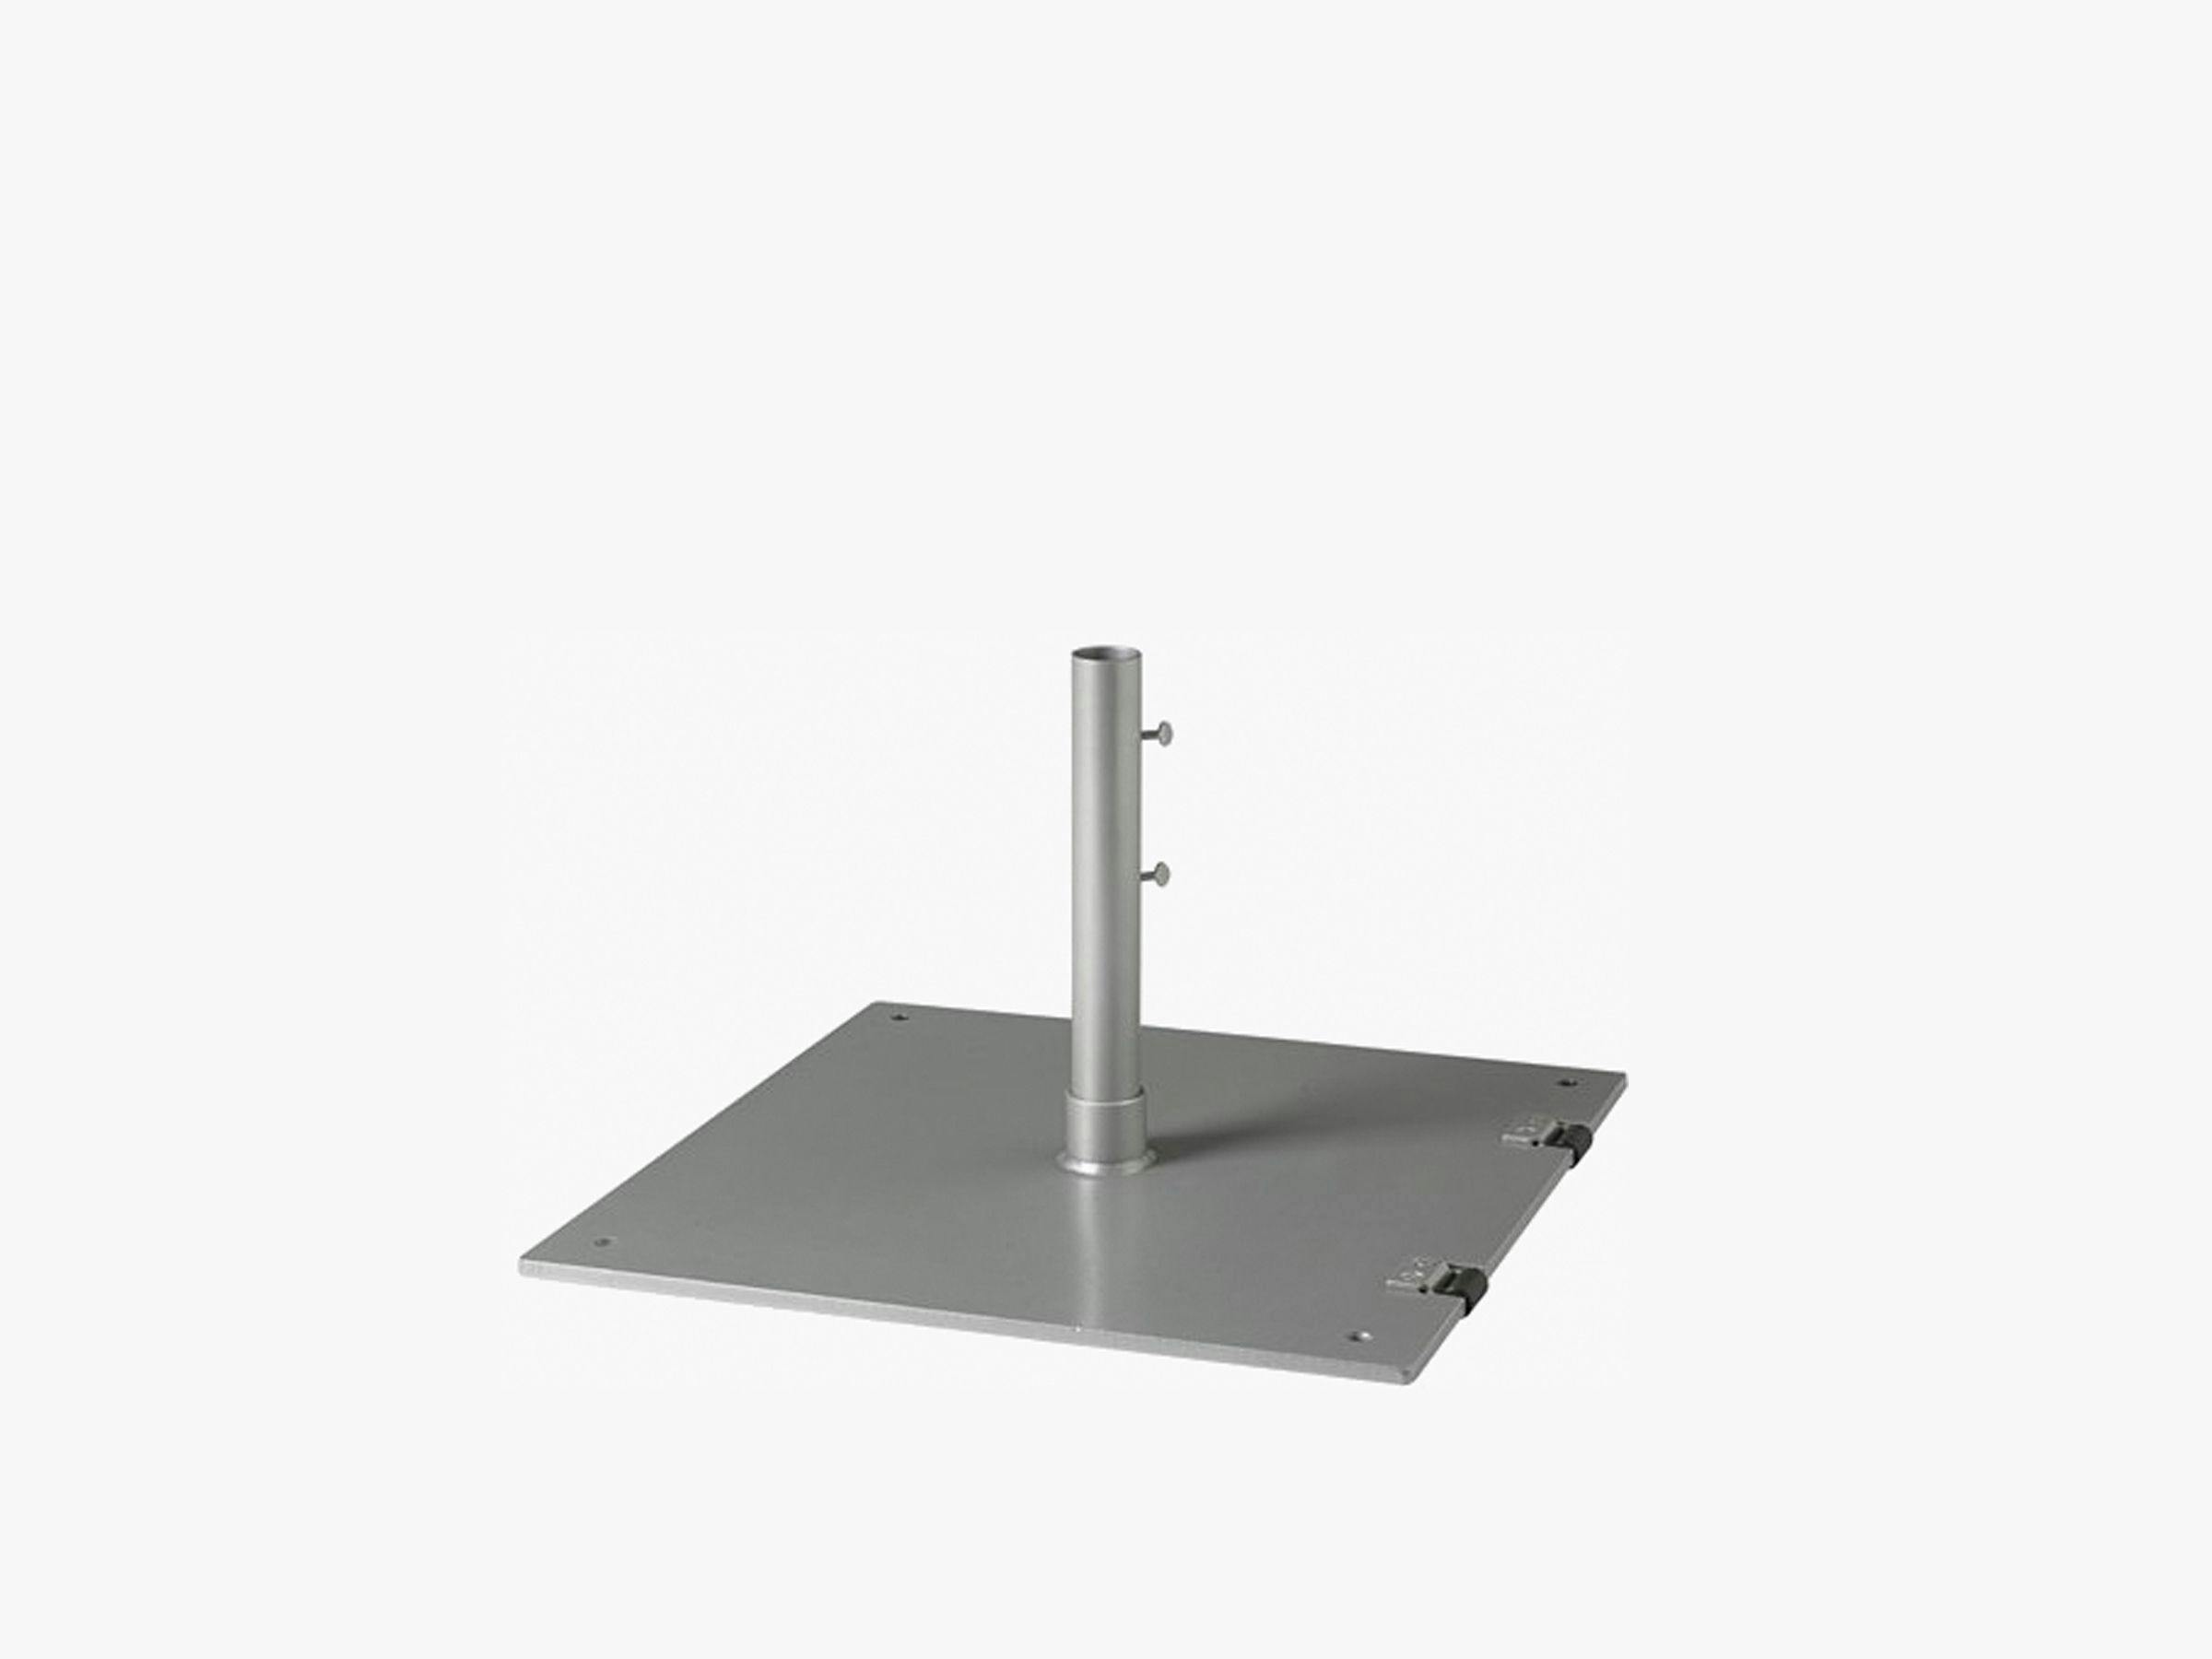 Steel Plate Base, 24" Square, Fits 2" Pole, Freestanding